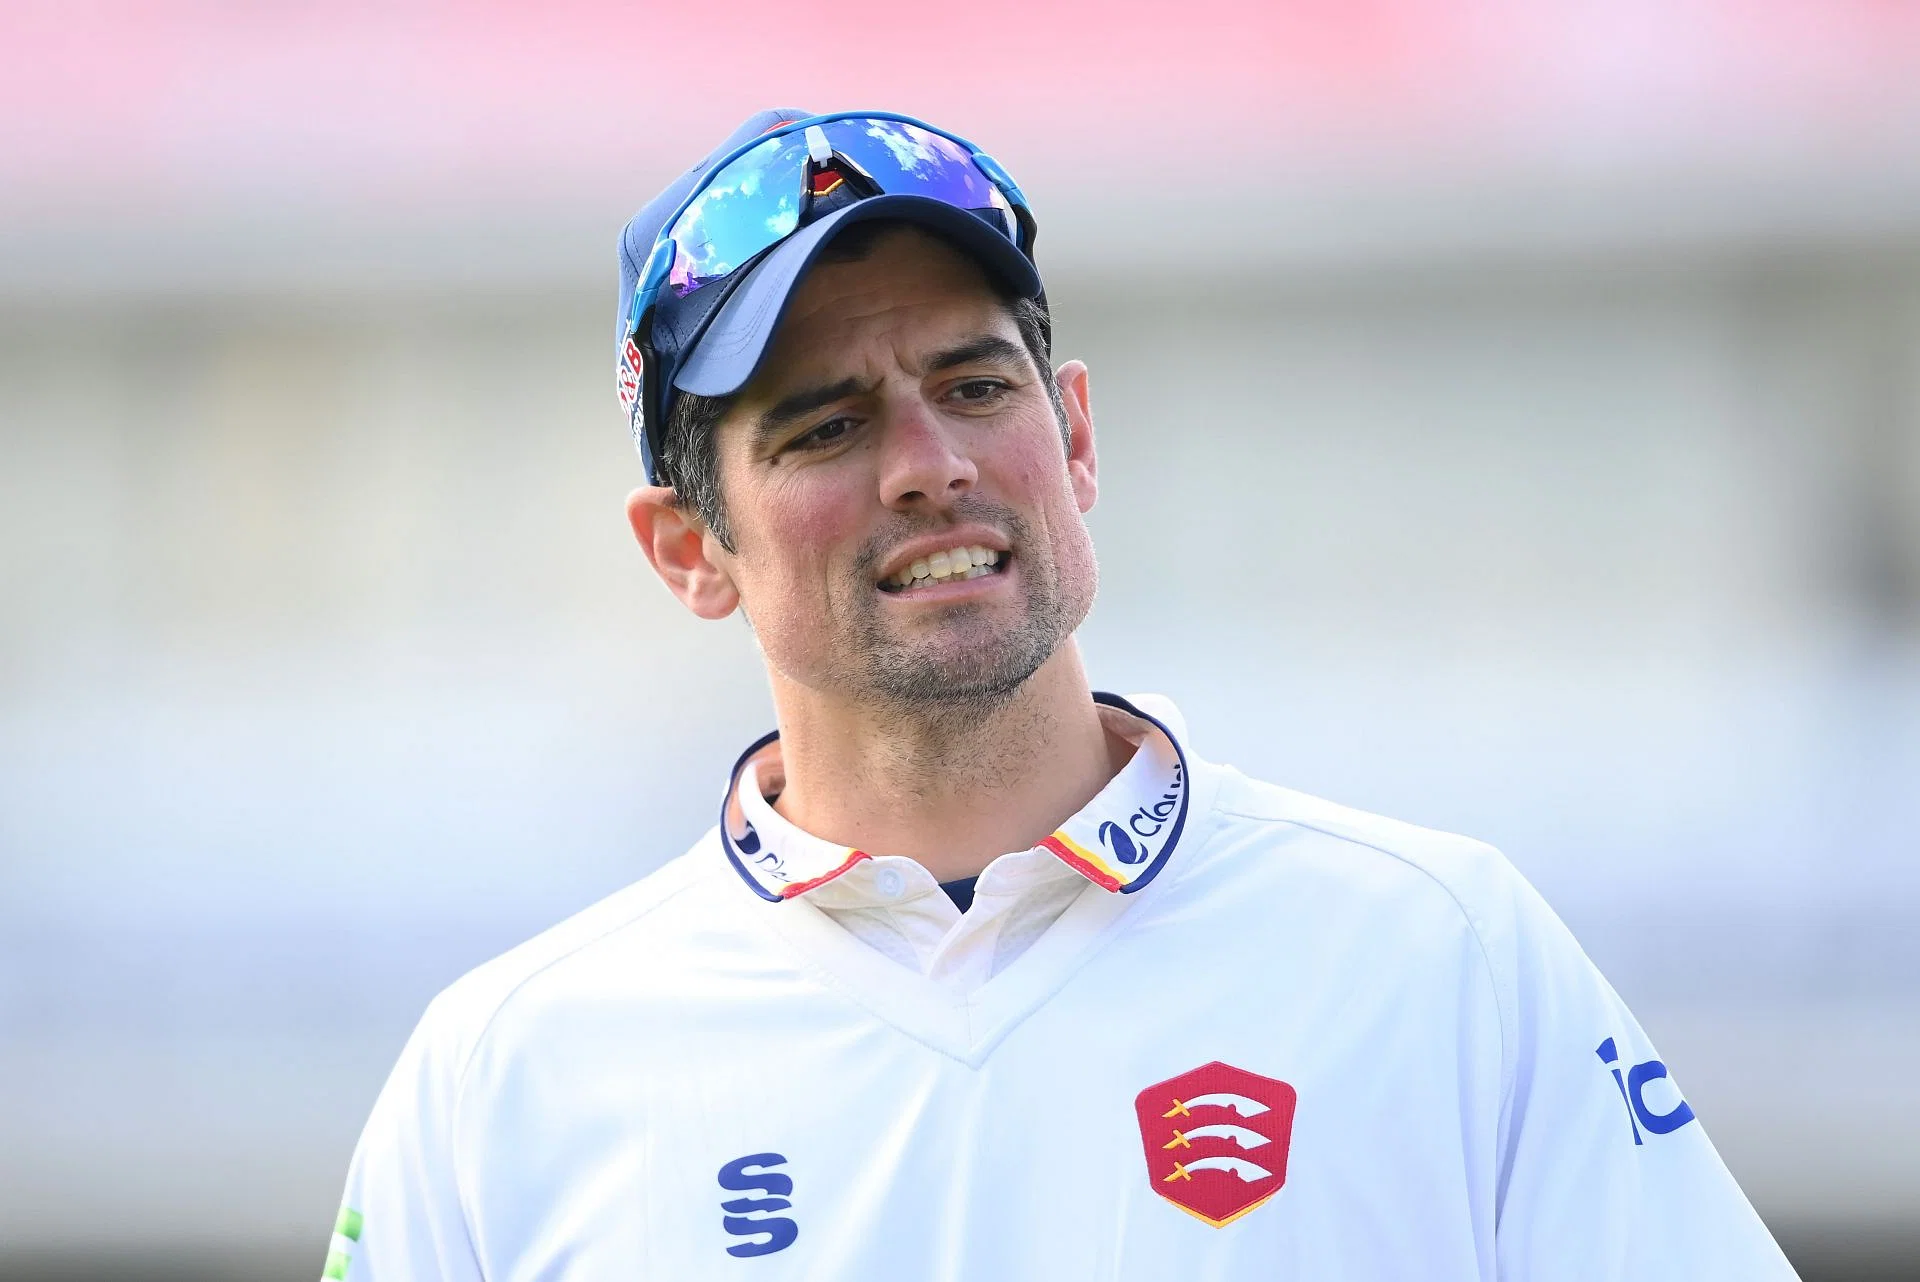 Concerned About Lack Of Match Practice, Says Alastair Cook Ahead Of India-England Test Series